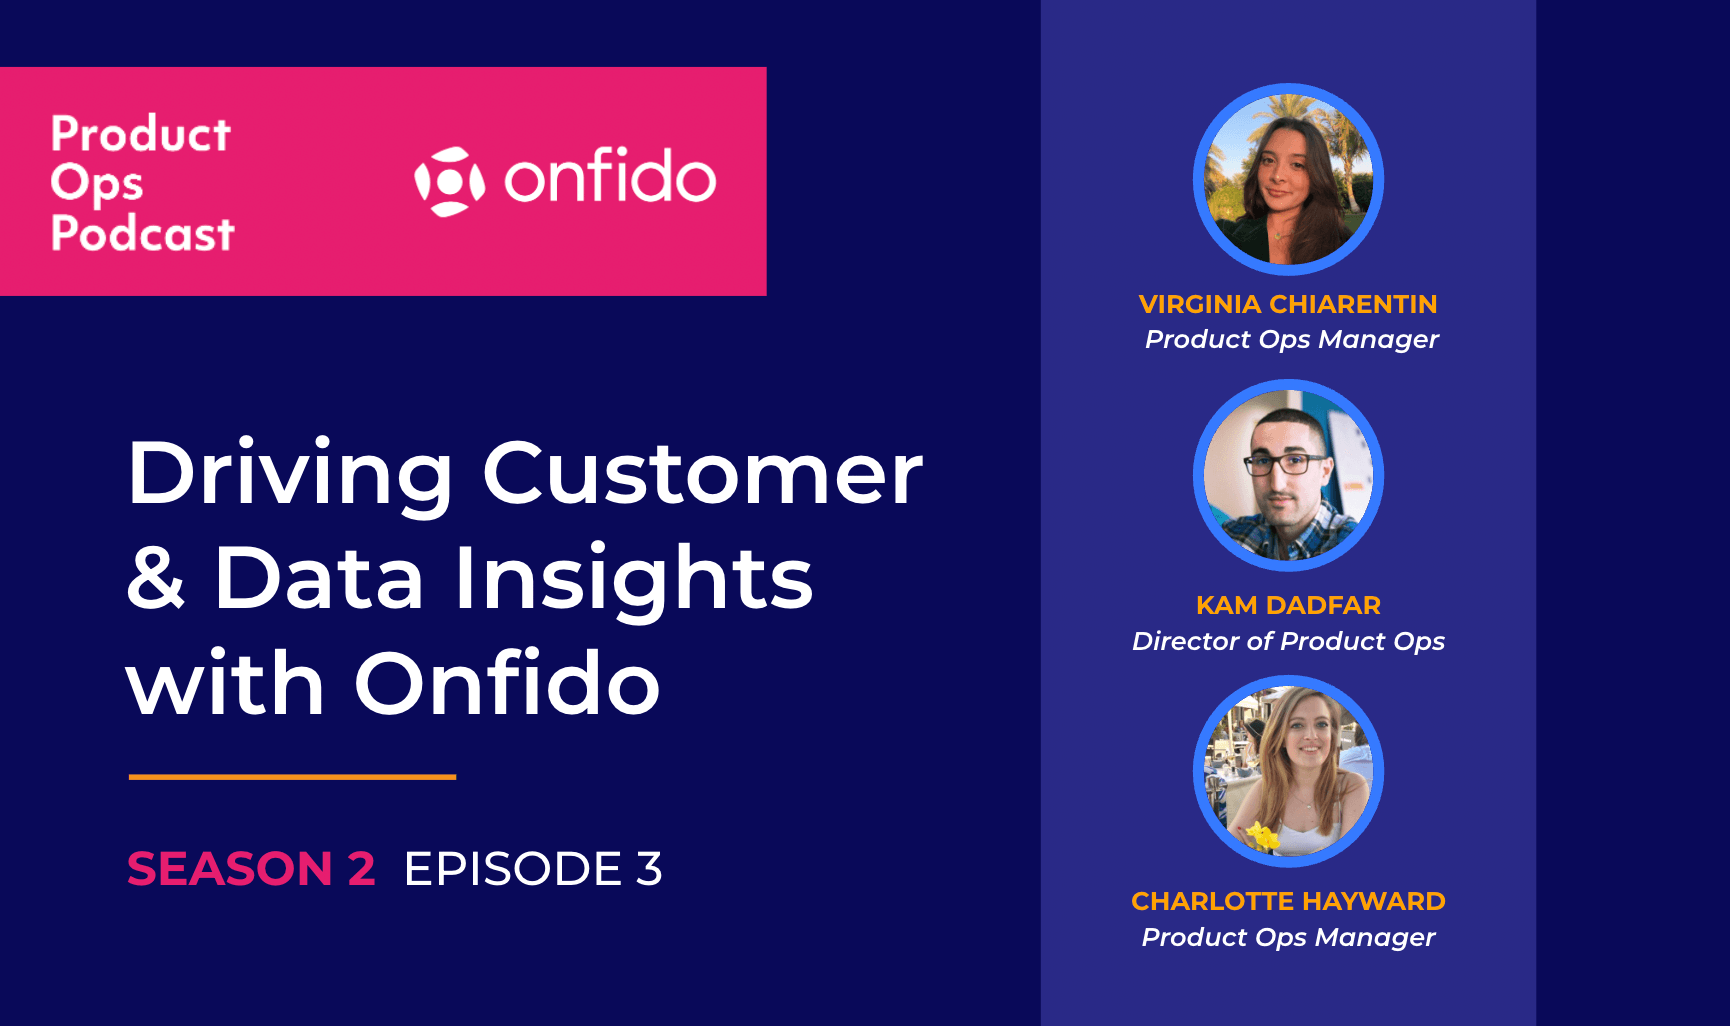 Driving customer and data insights, with Onfido